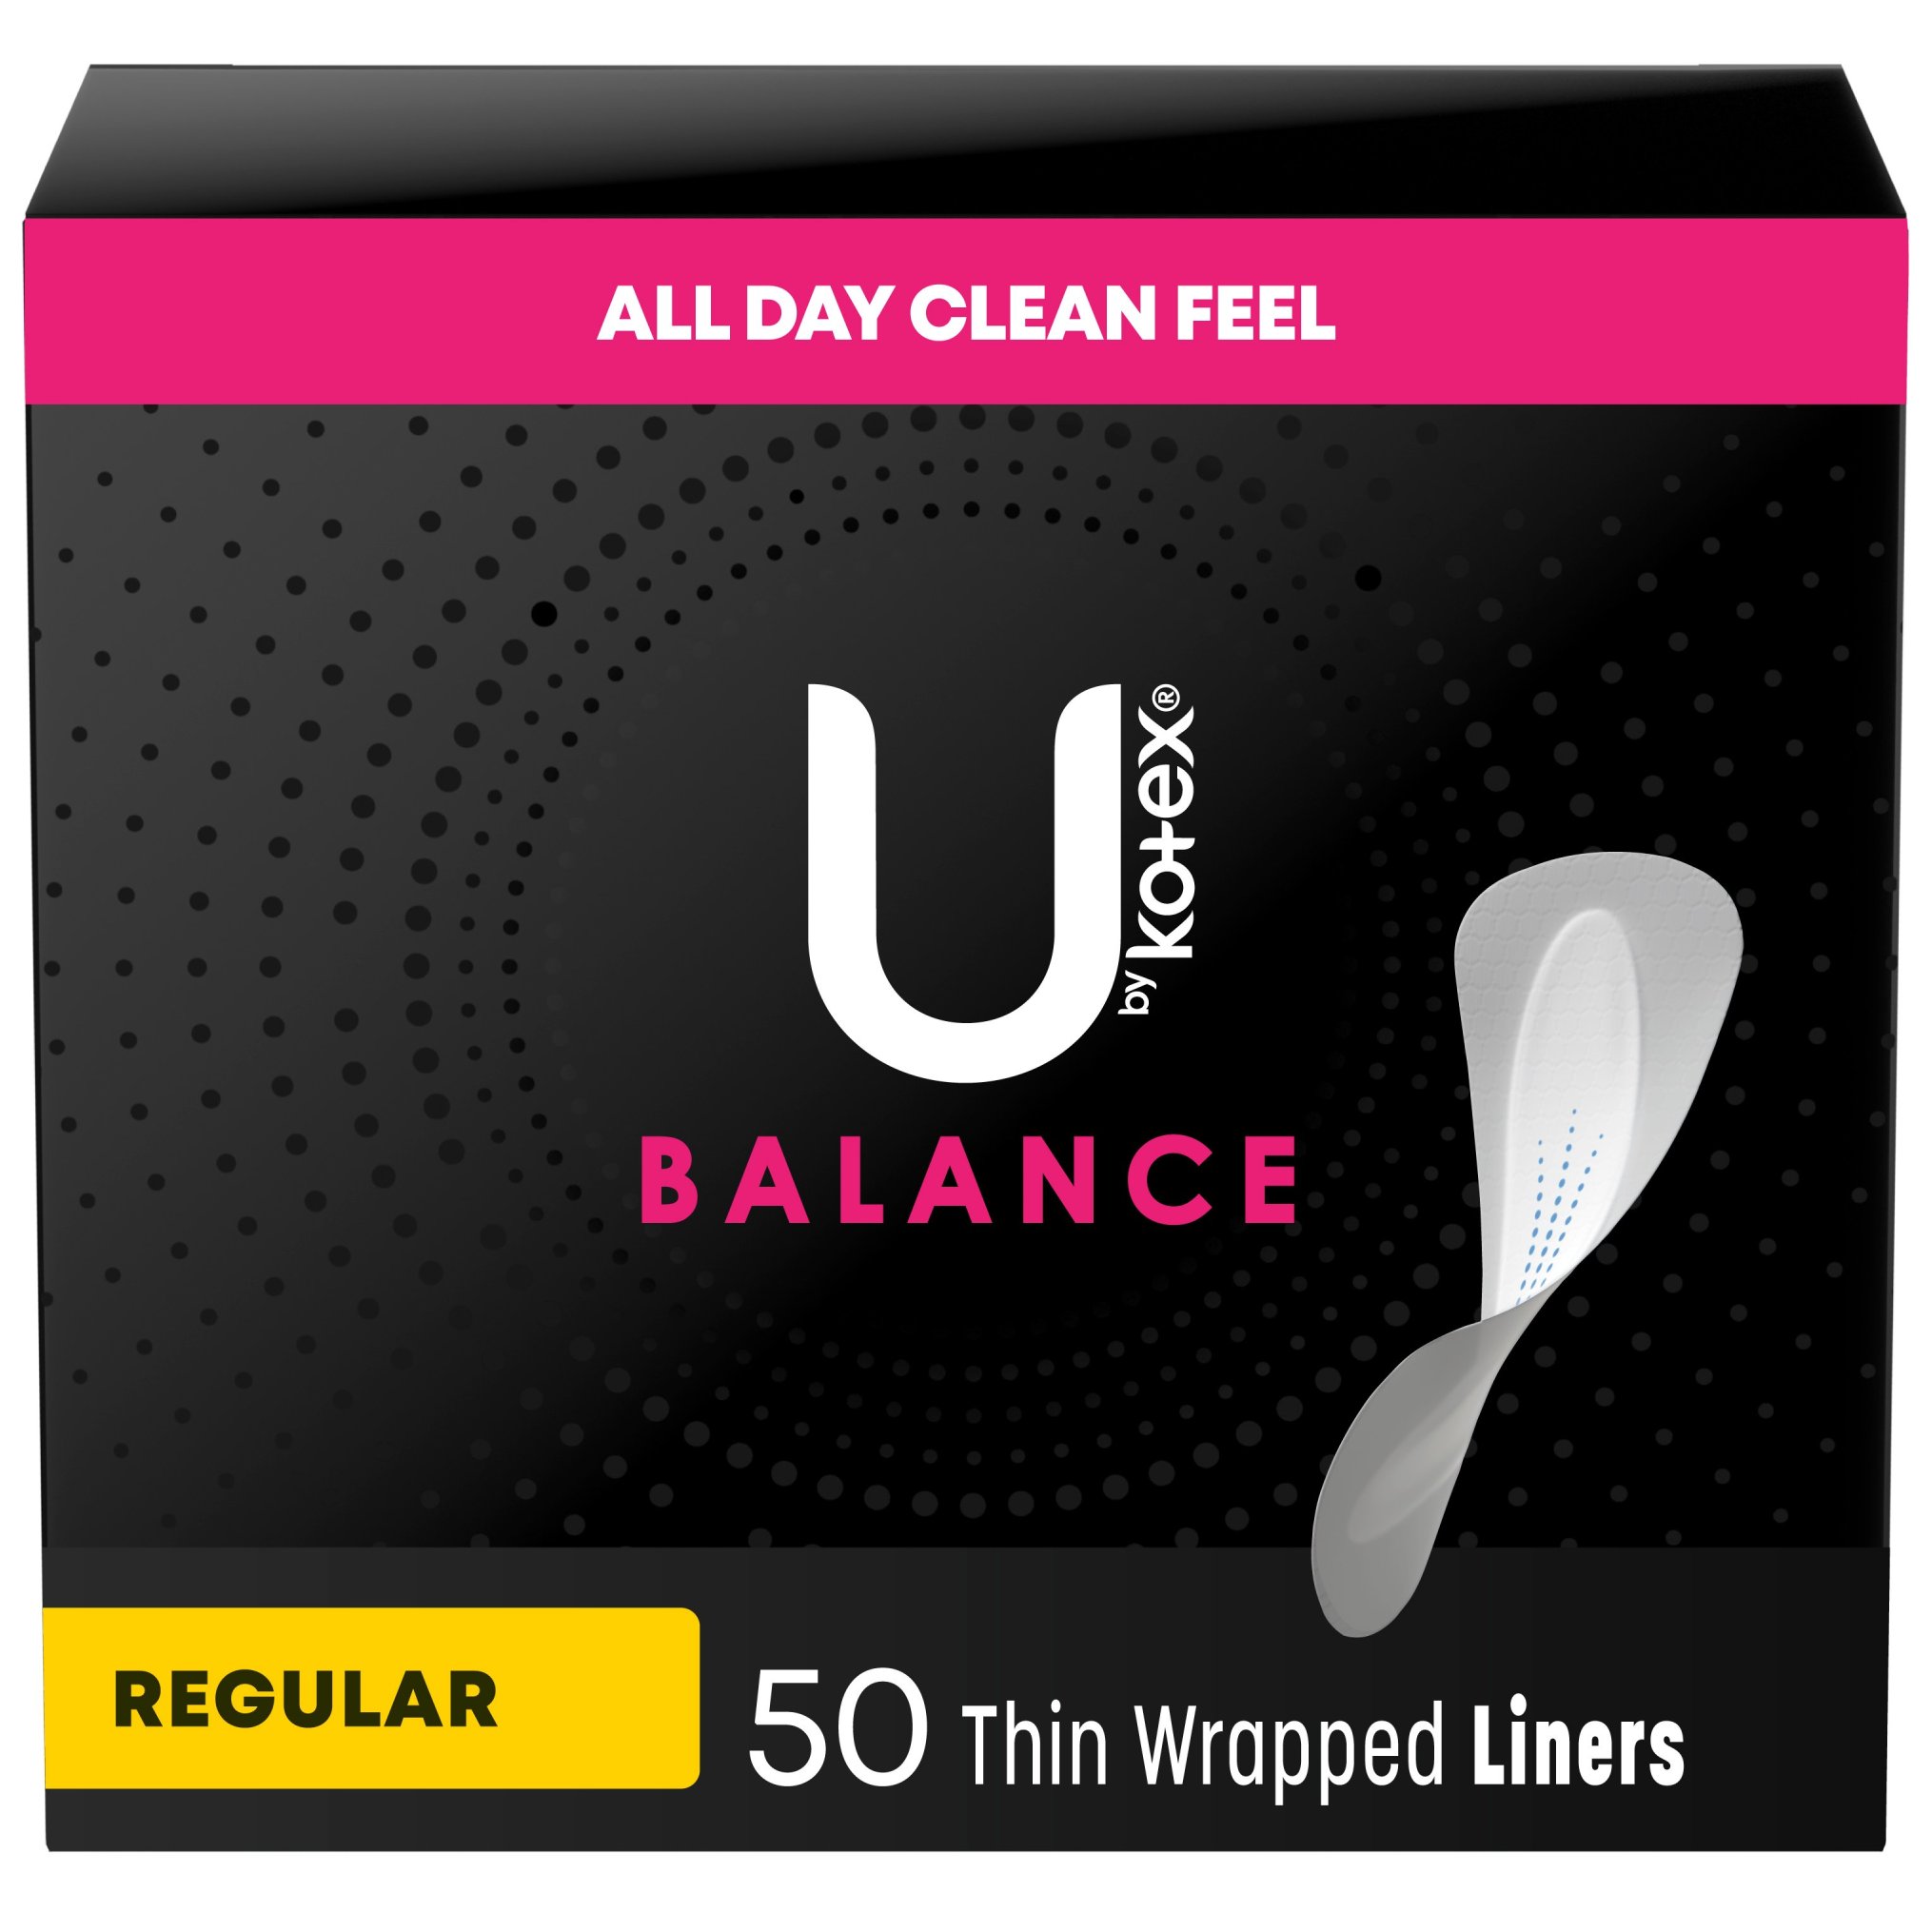 U by Kotex Barely There Liners, Light Absorbency, Regular, Fragrance-Free, 50 Count